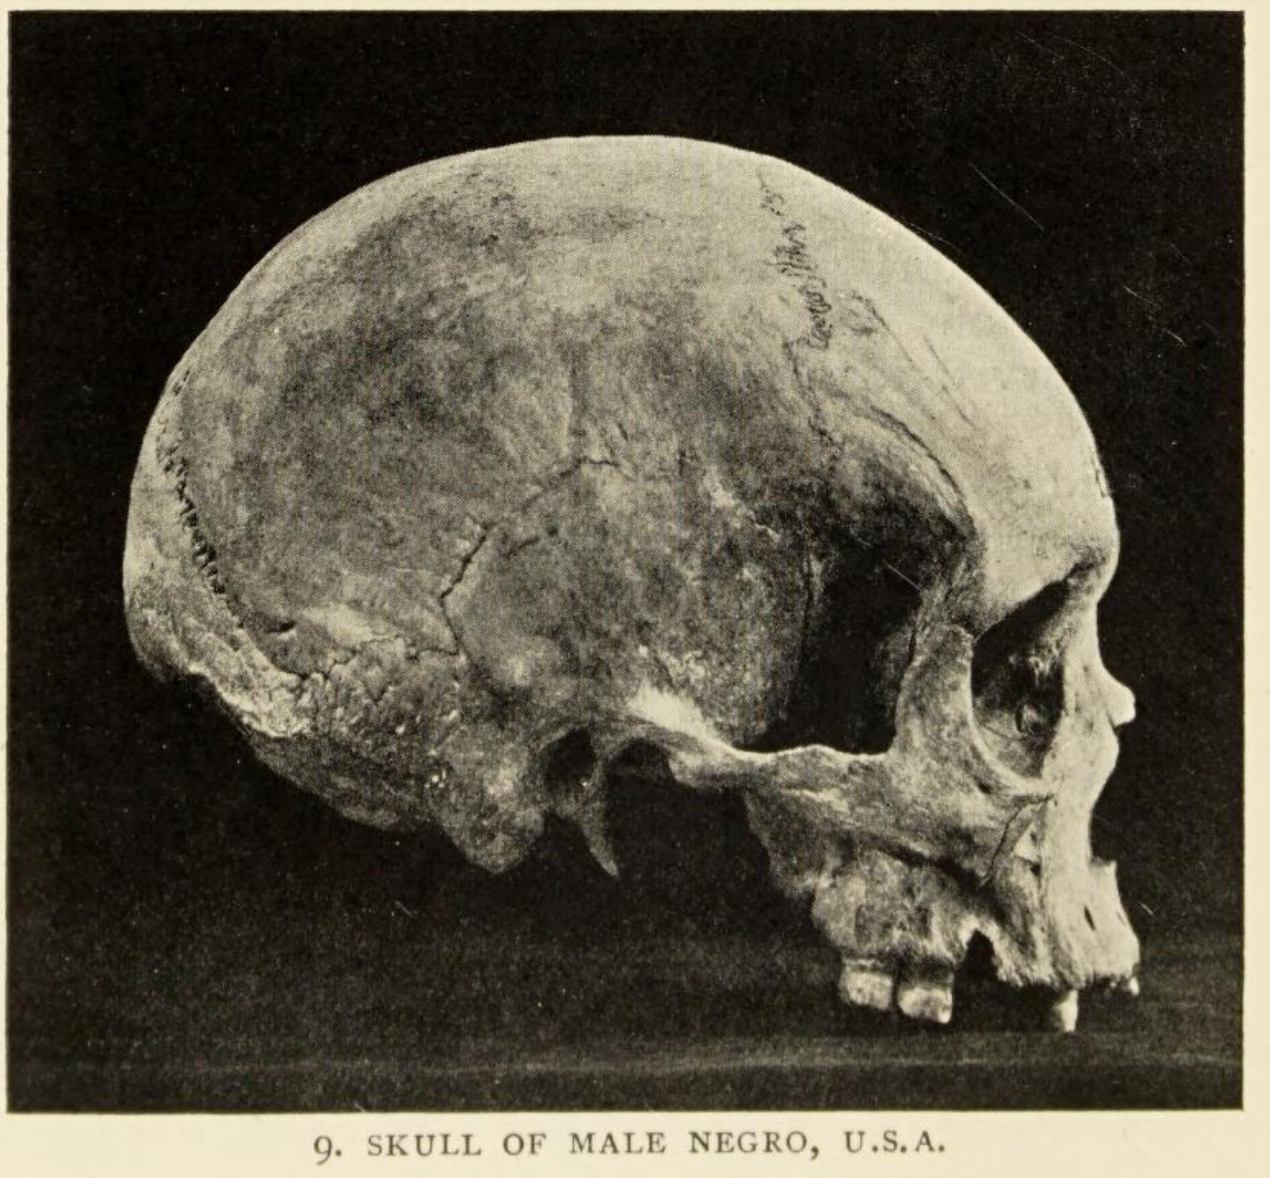 Black and white photograph of a side view of a partial human skull (lower jaw missing); from "The Negro in the New World," Harry H Johnston, 1910